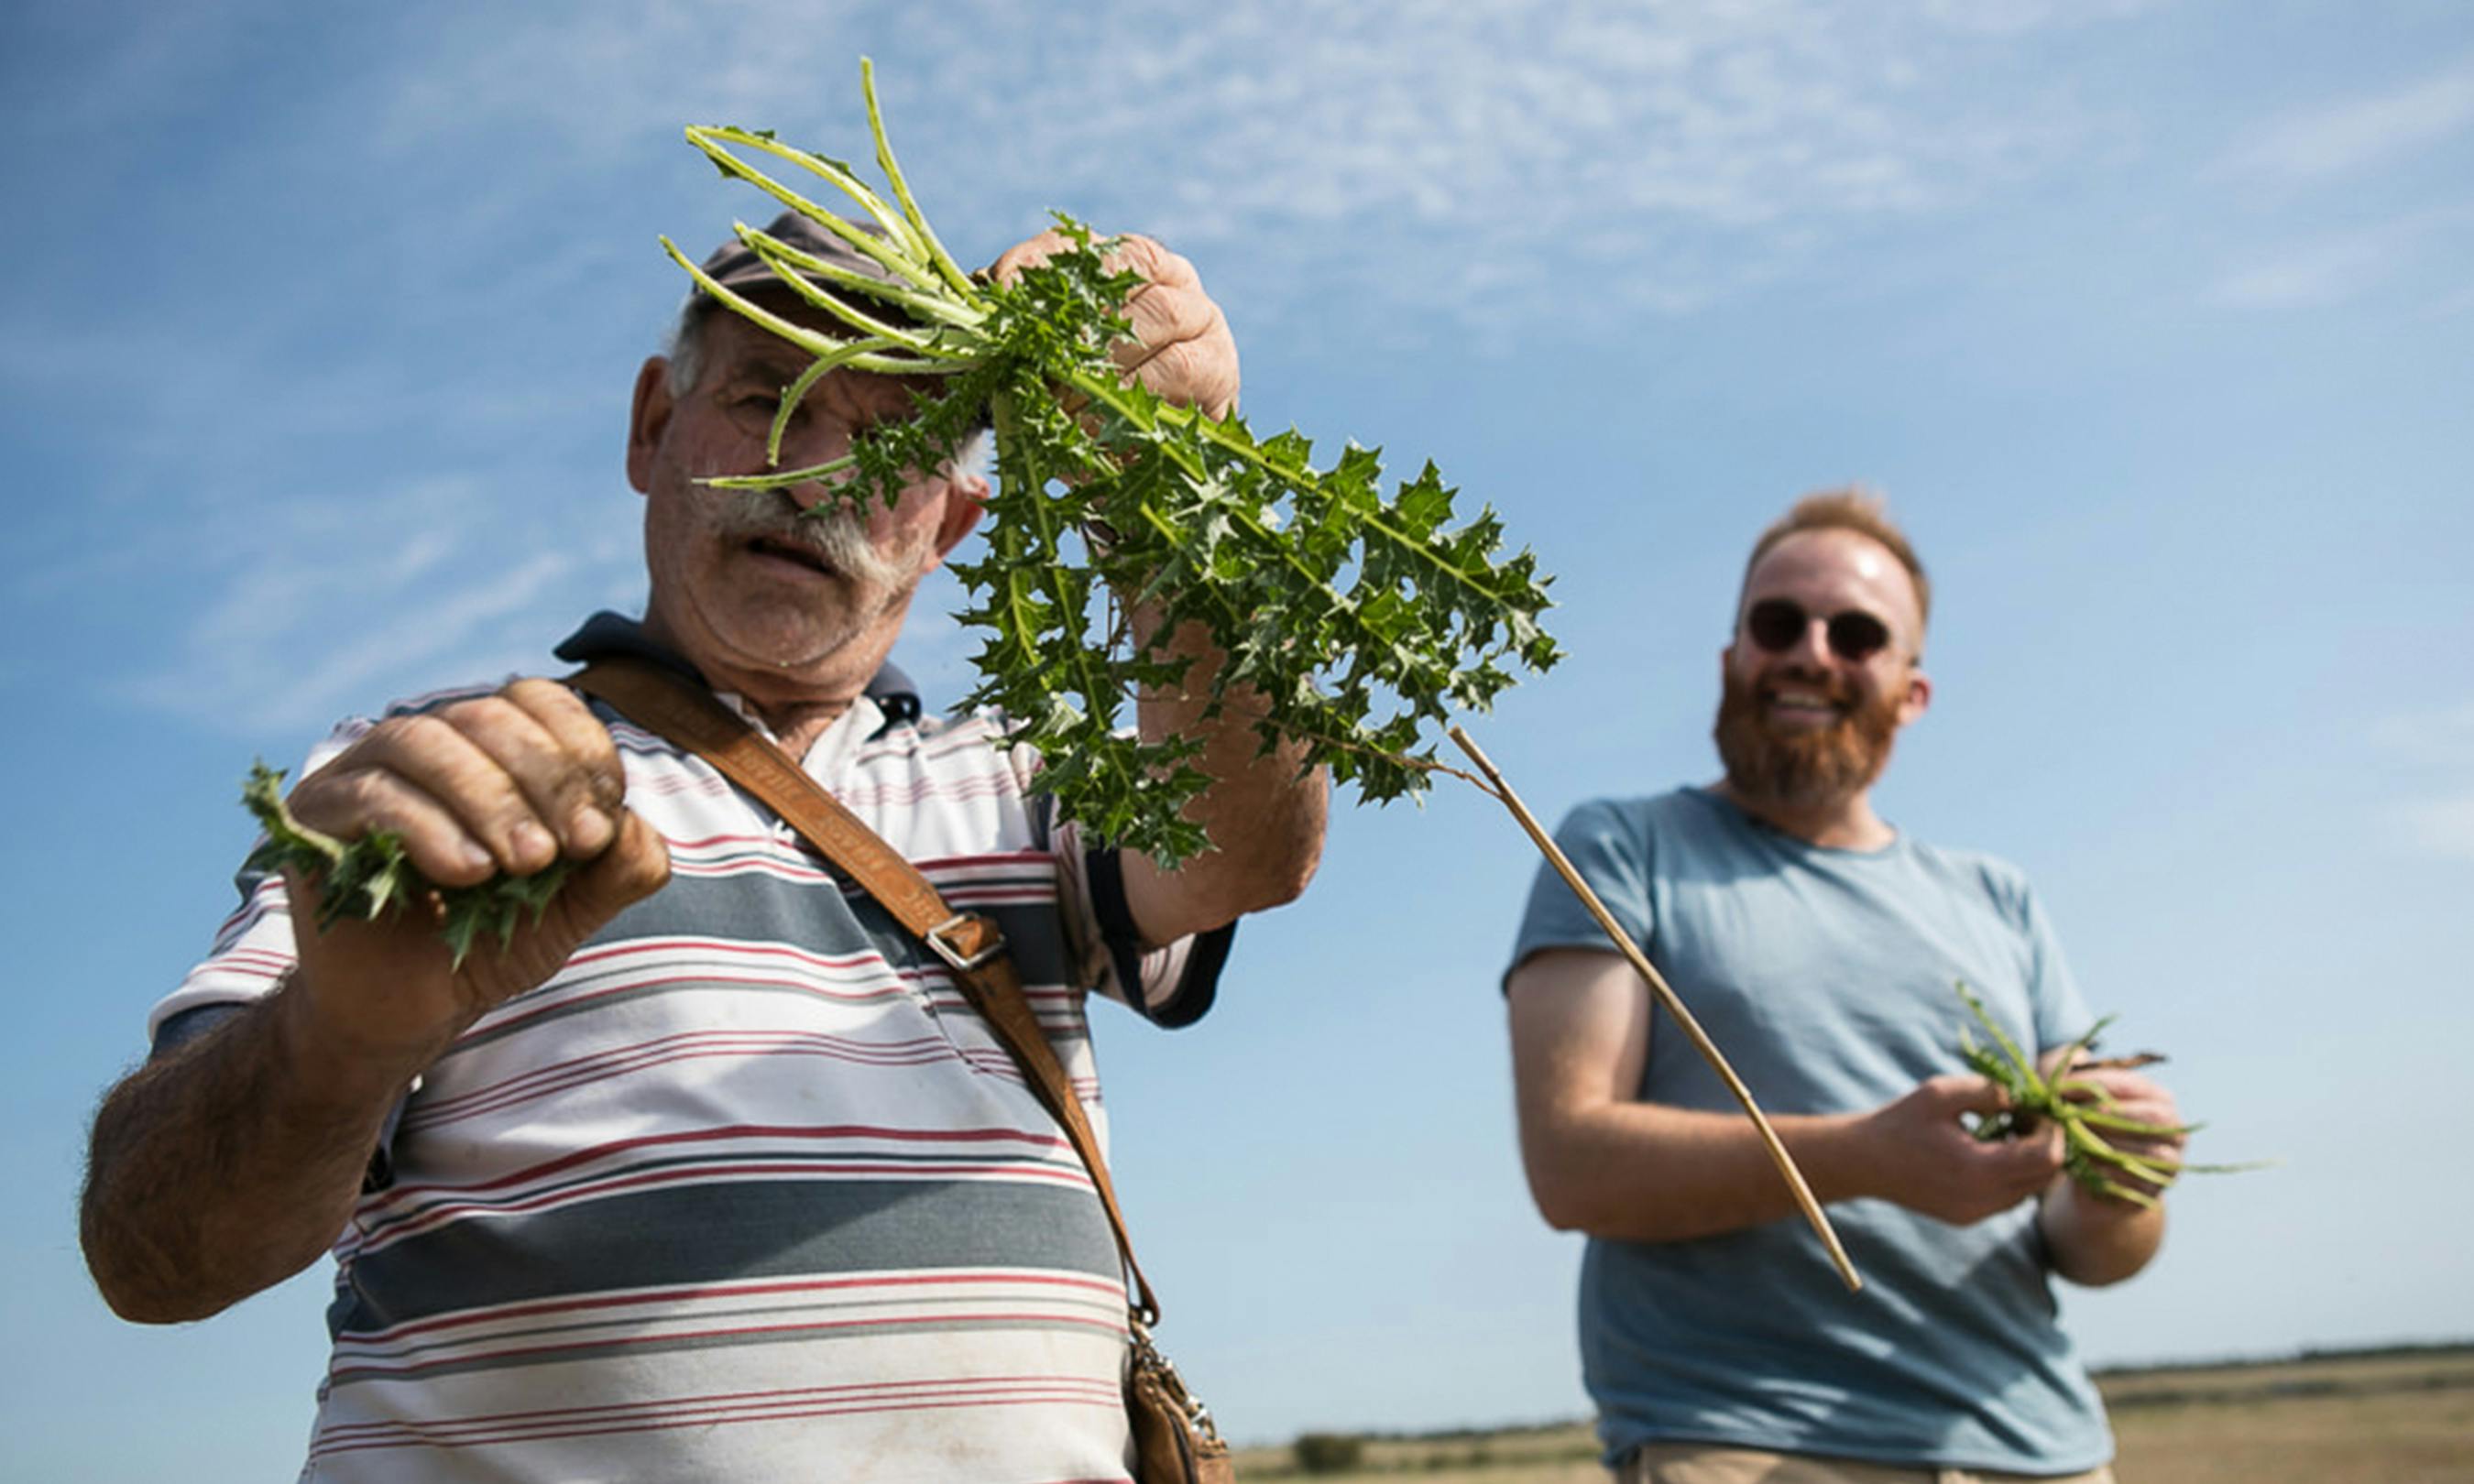 In Puglia, foraging for foodstuff is a S.A.L.T. Experience